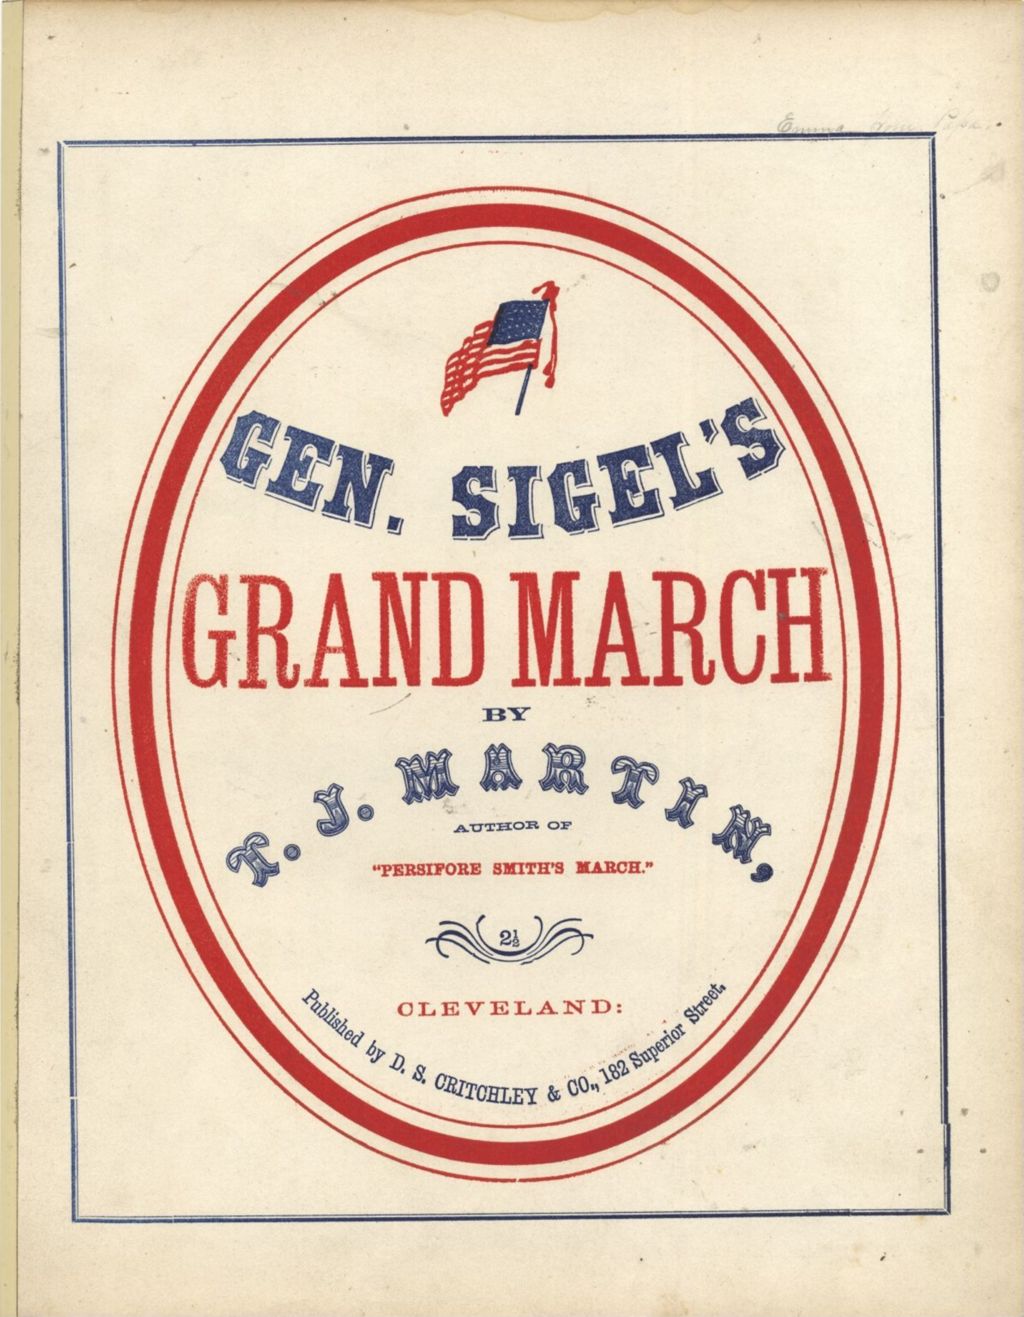 General Sigel's Grand March